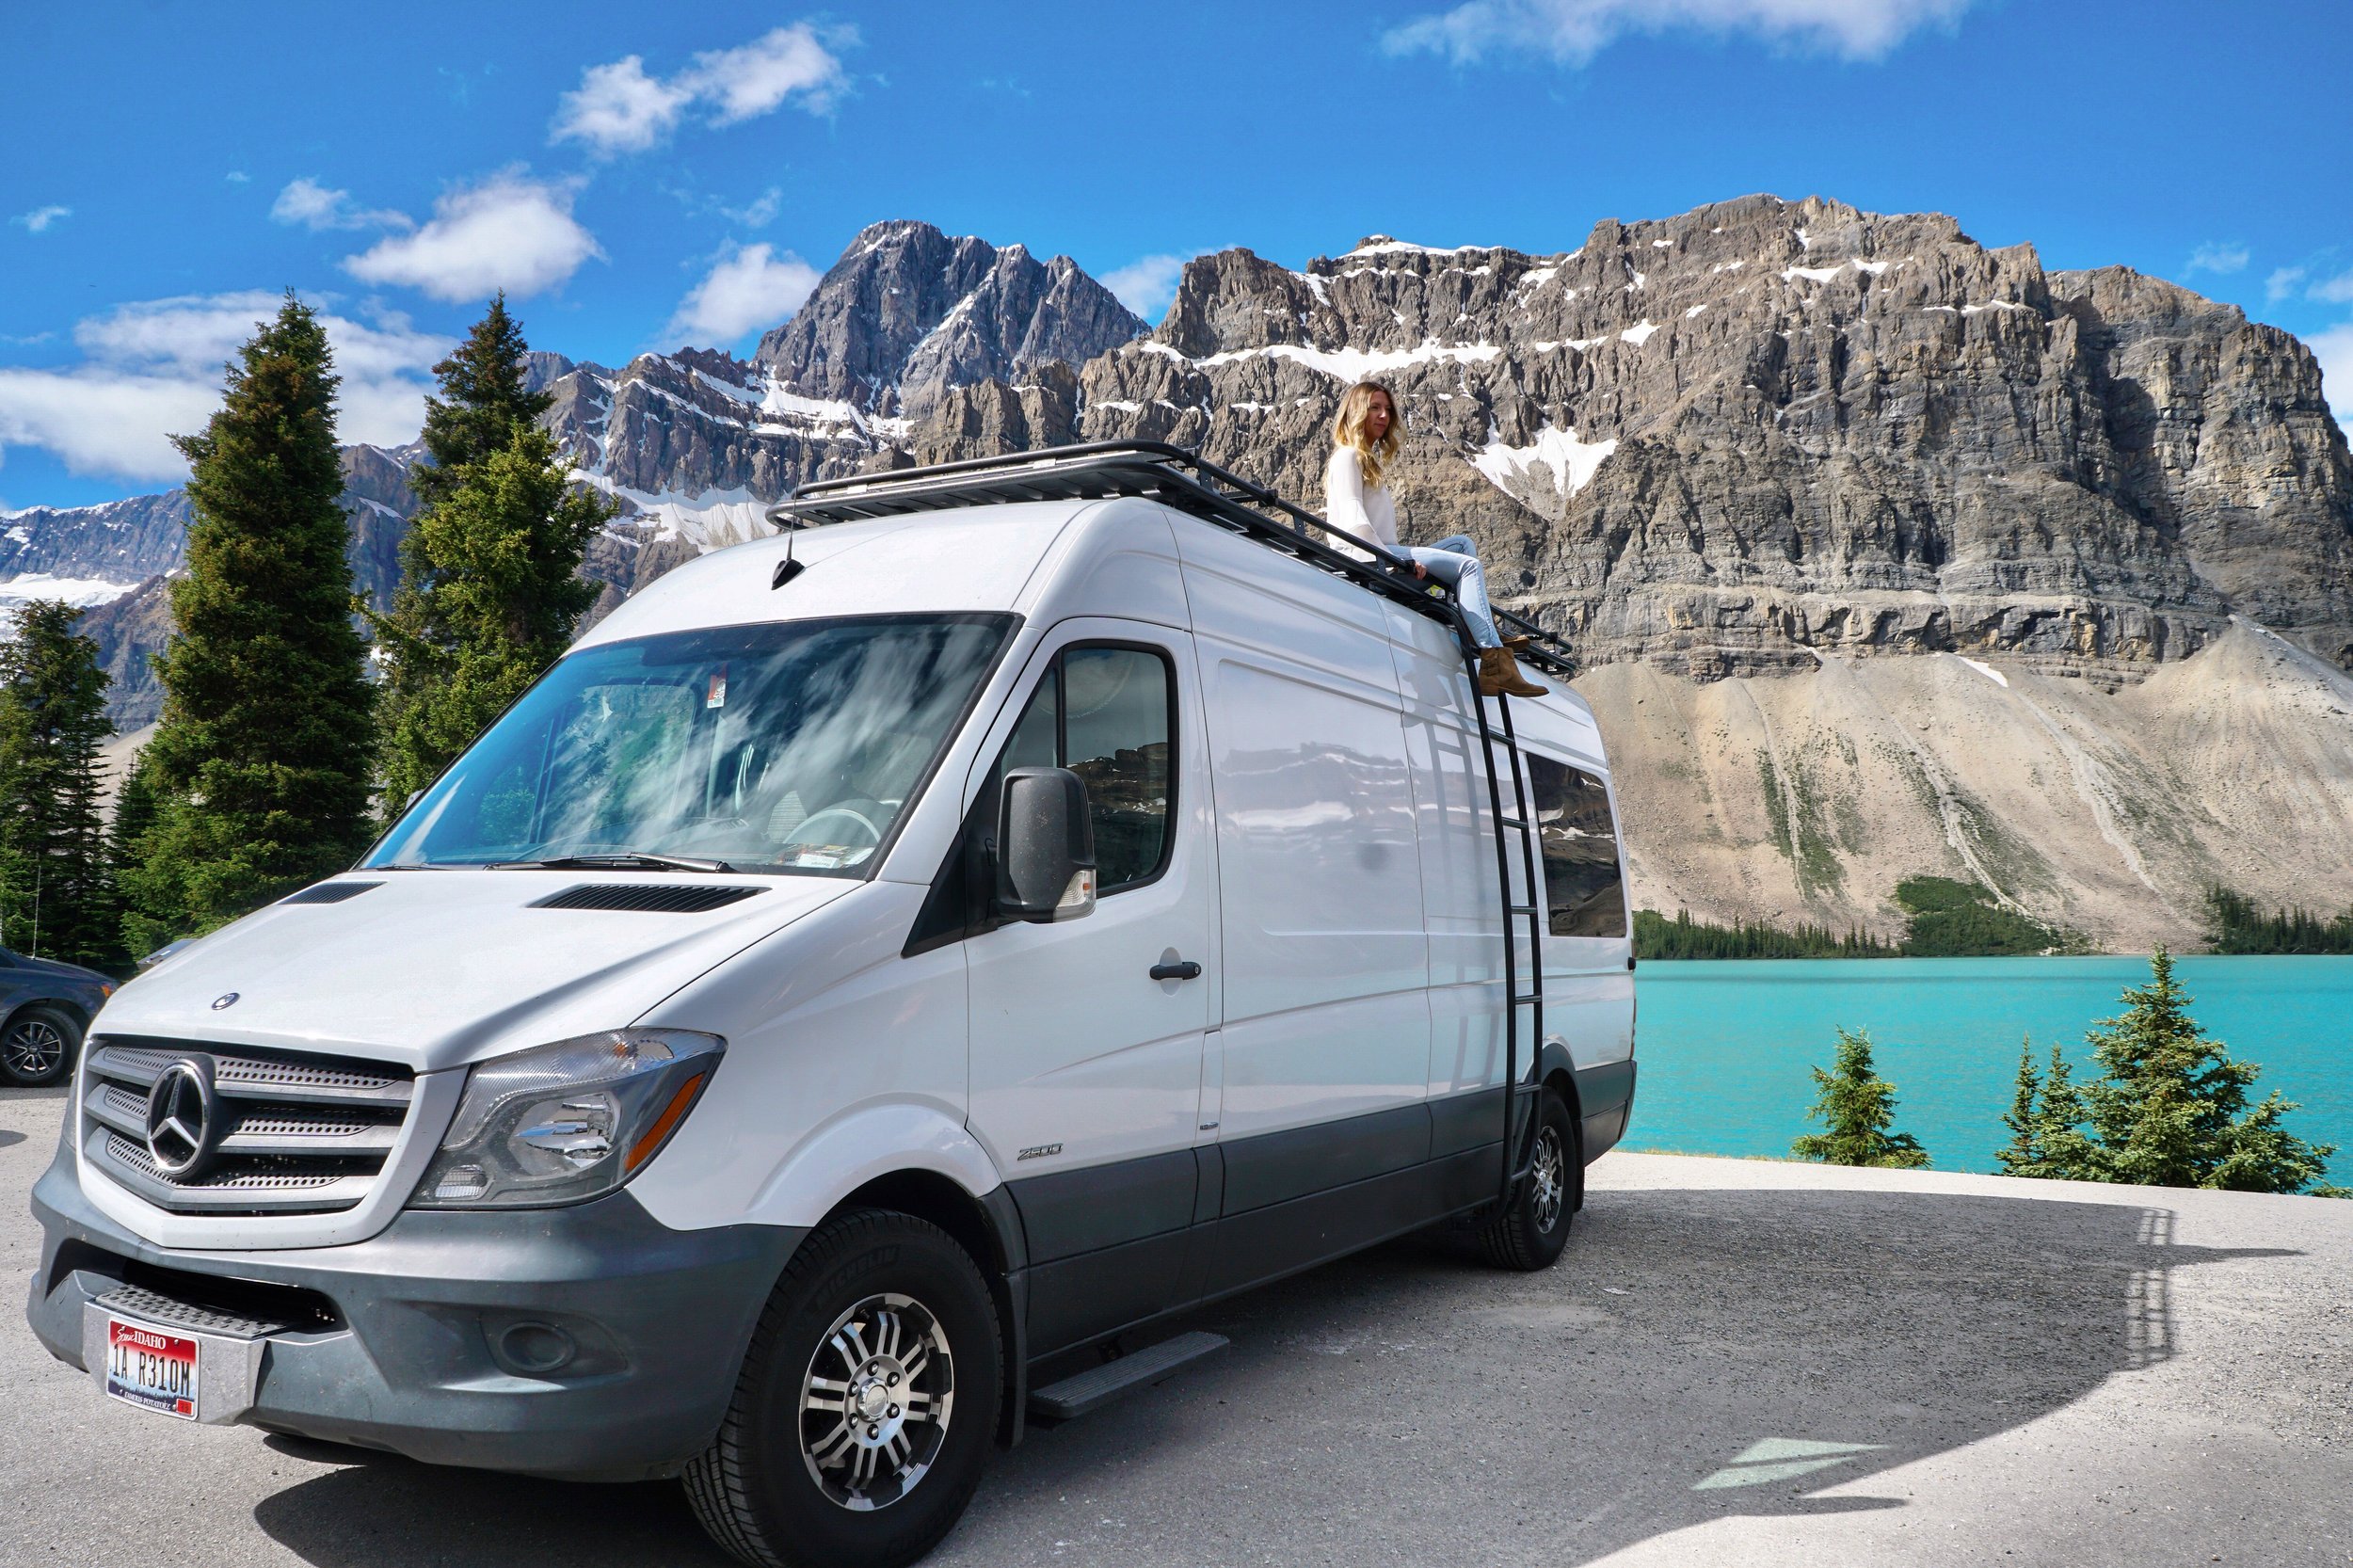 How Much Does A Conversion Van Cost